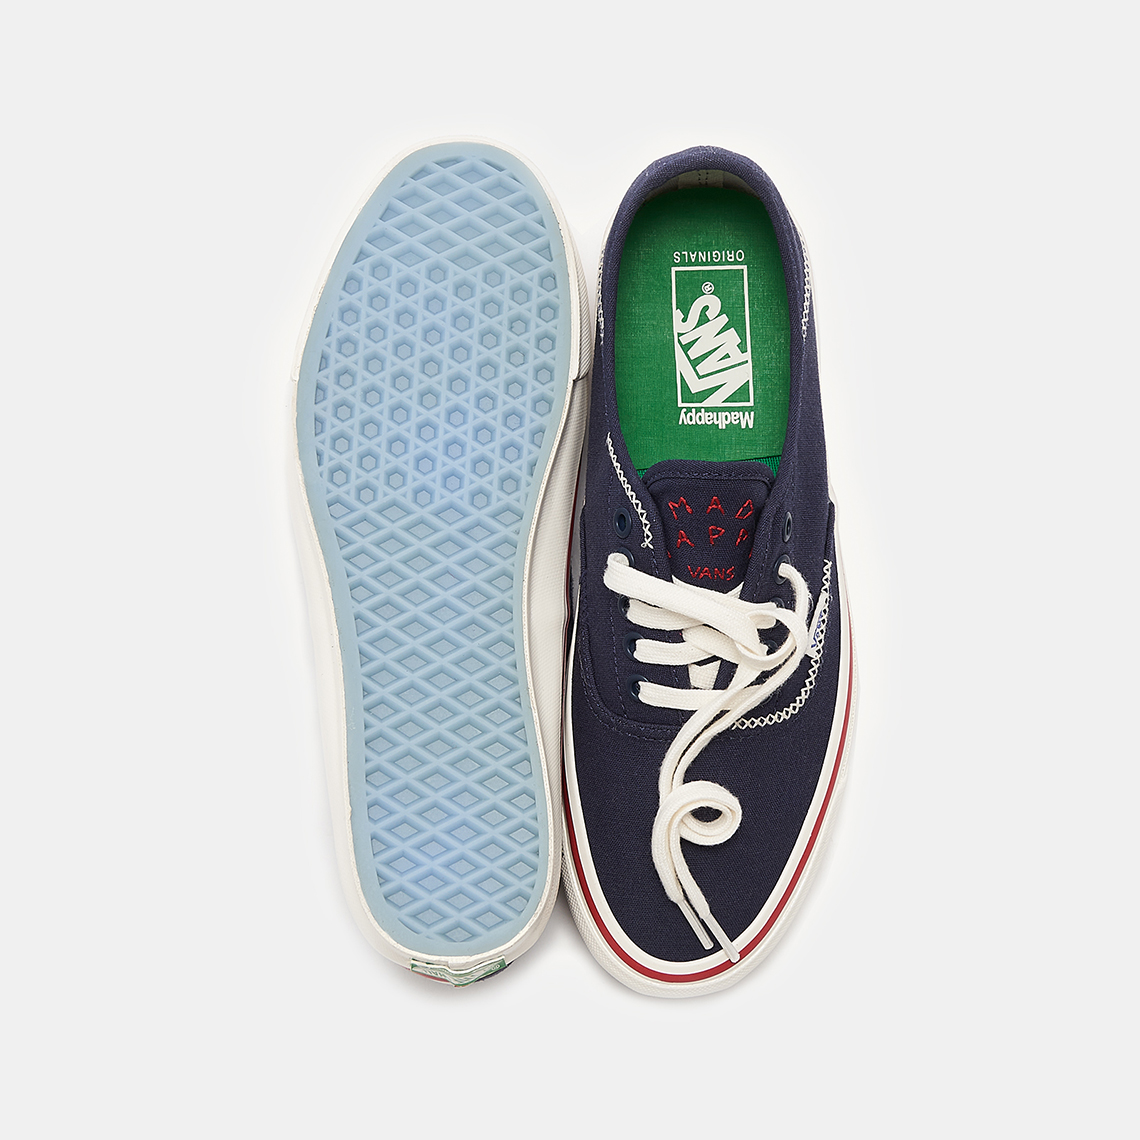 Madhappy Vans Og Style 43 Lx Release Date 8